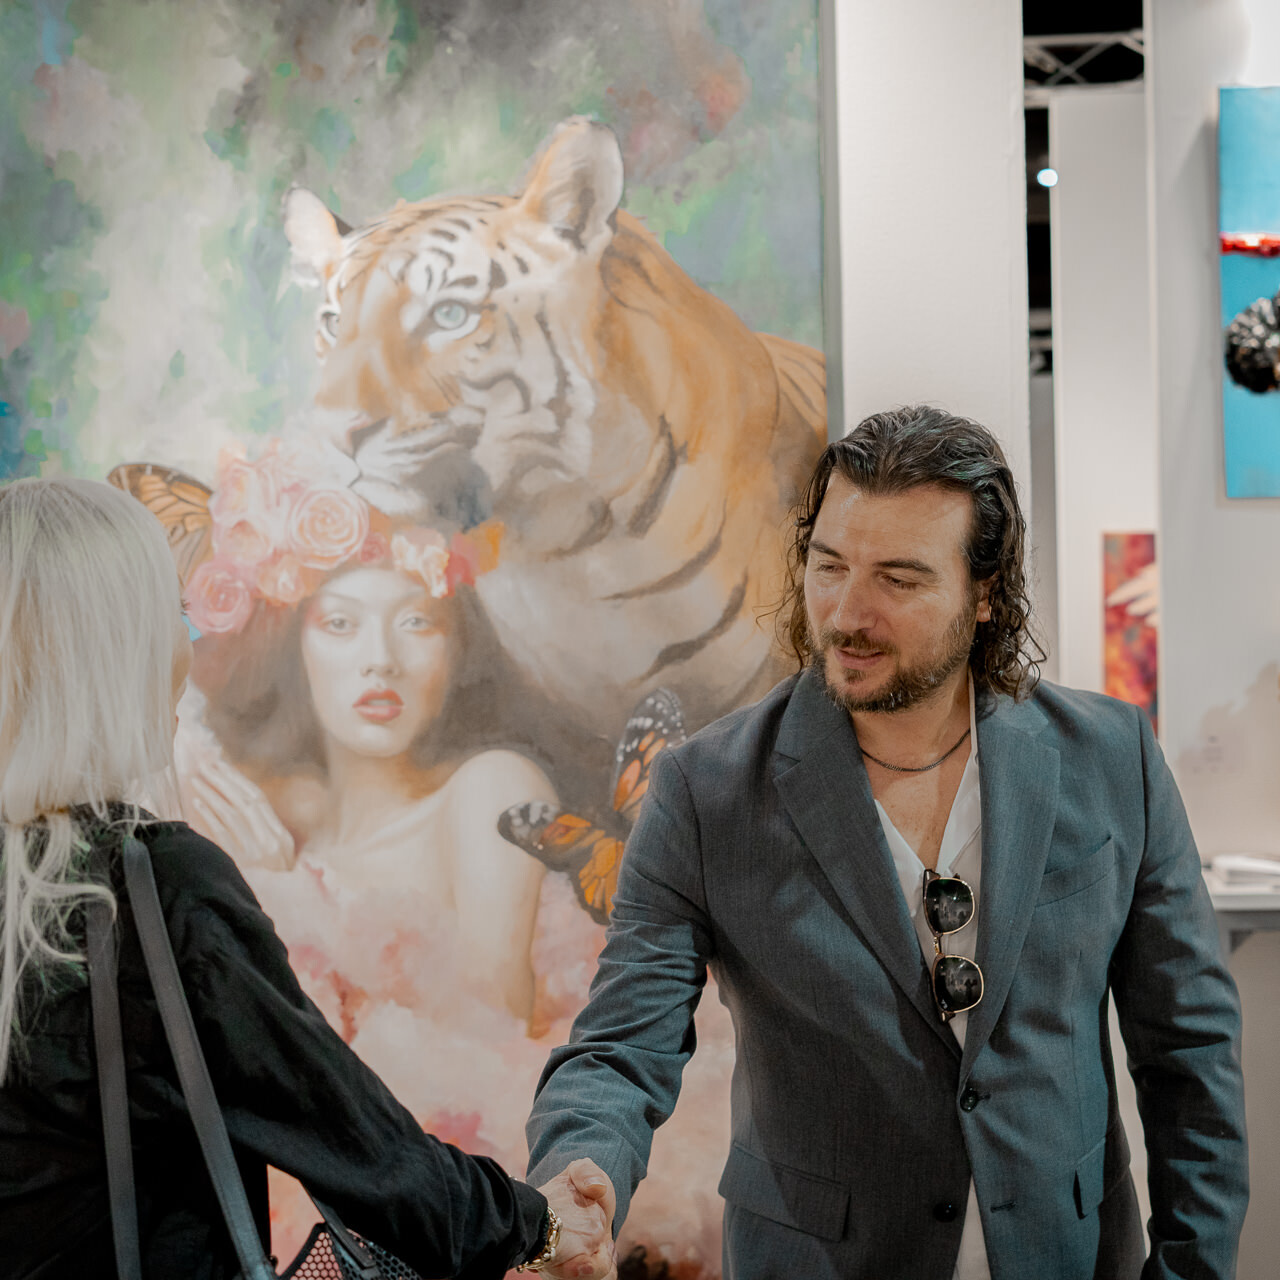 Artist Alex Righetto warmly shakes hands with a visitor against the backdrop of his vibrant painting 'The Guardian' during Miami Art Week.